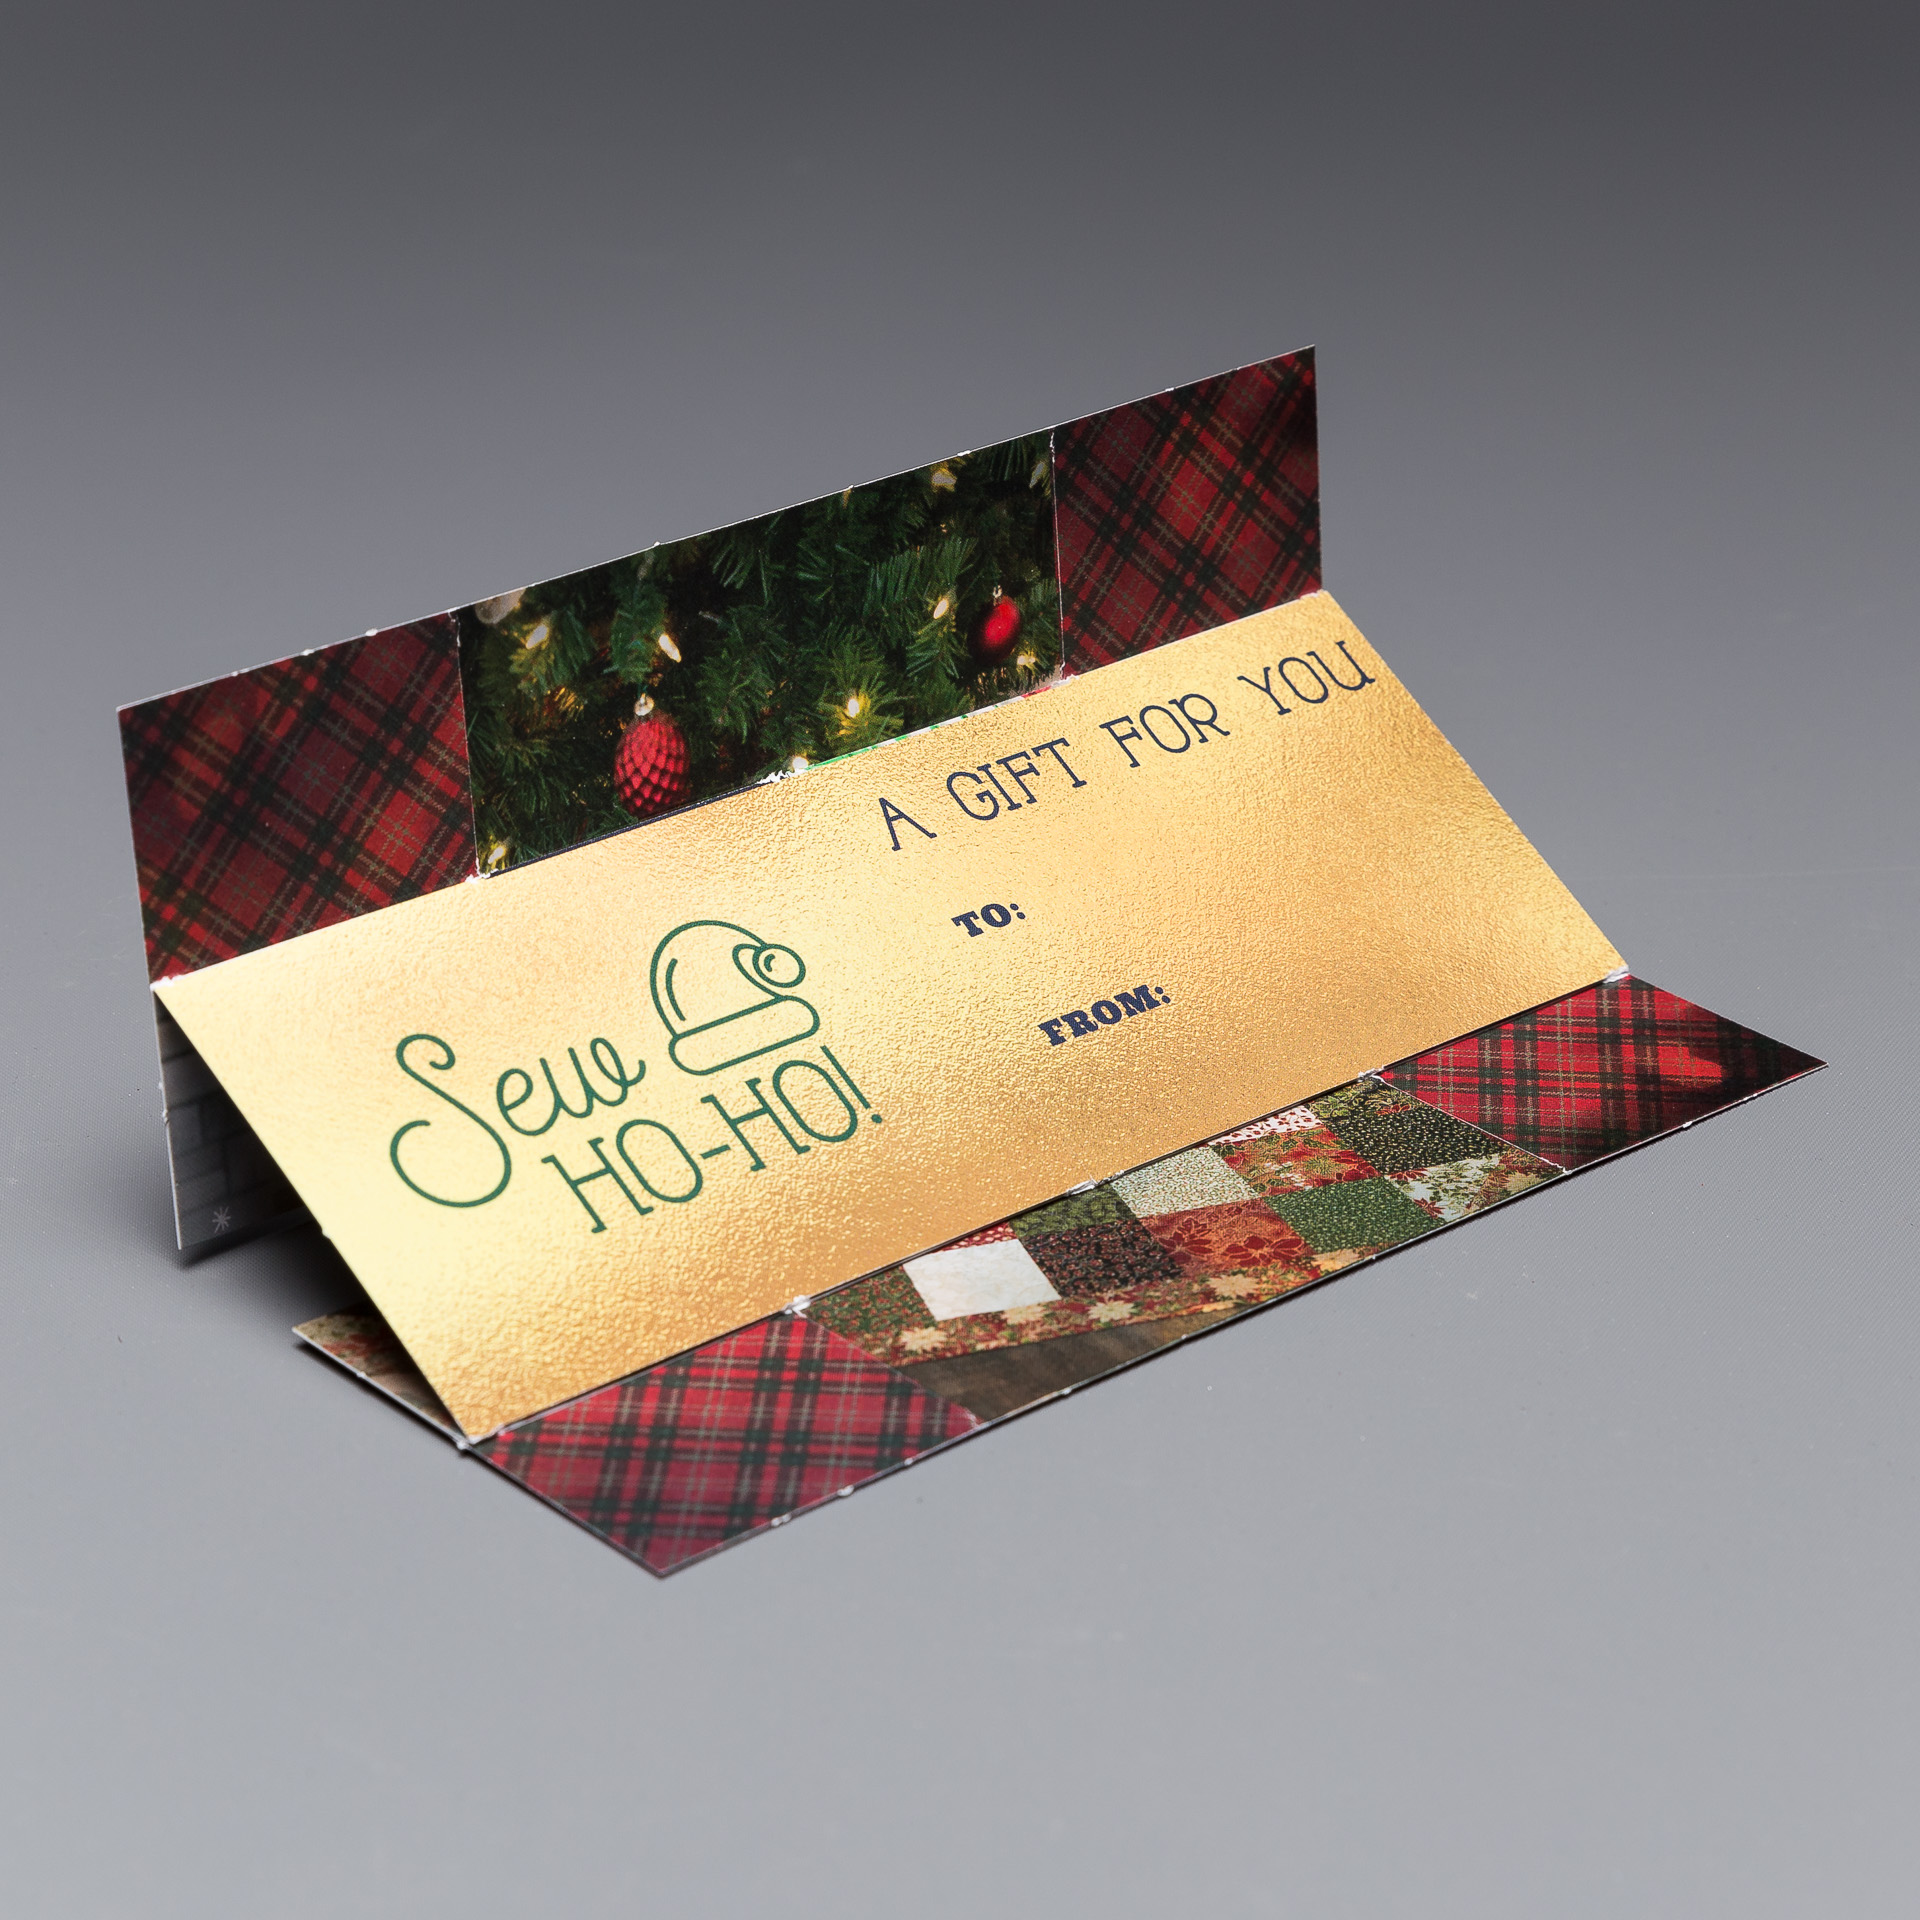 The Flapper® - an interactive direct mail piece that flips the creative holiday card model completely on its head